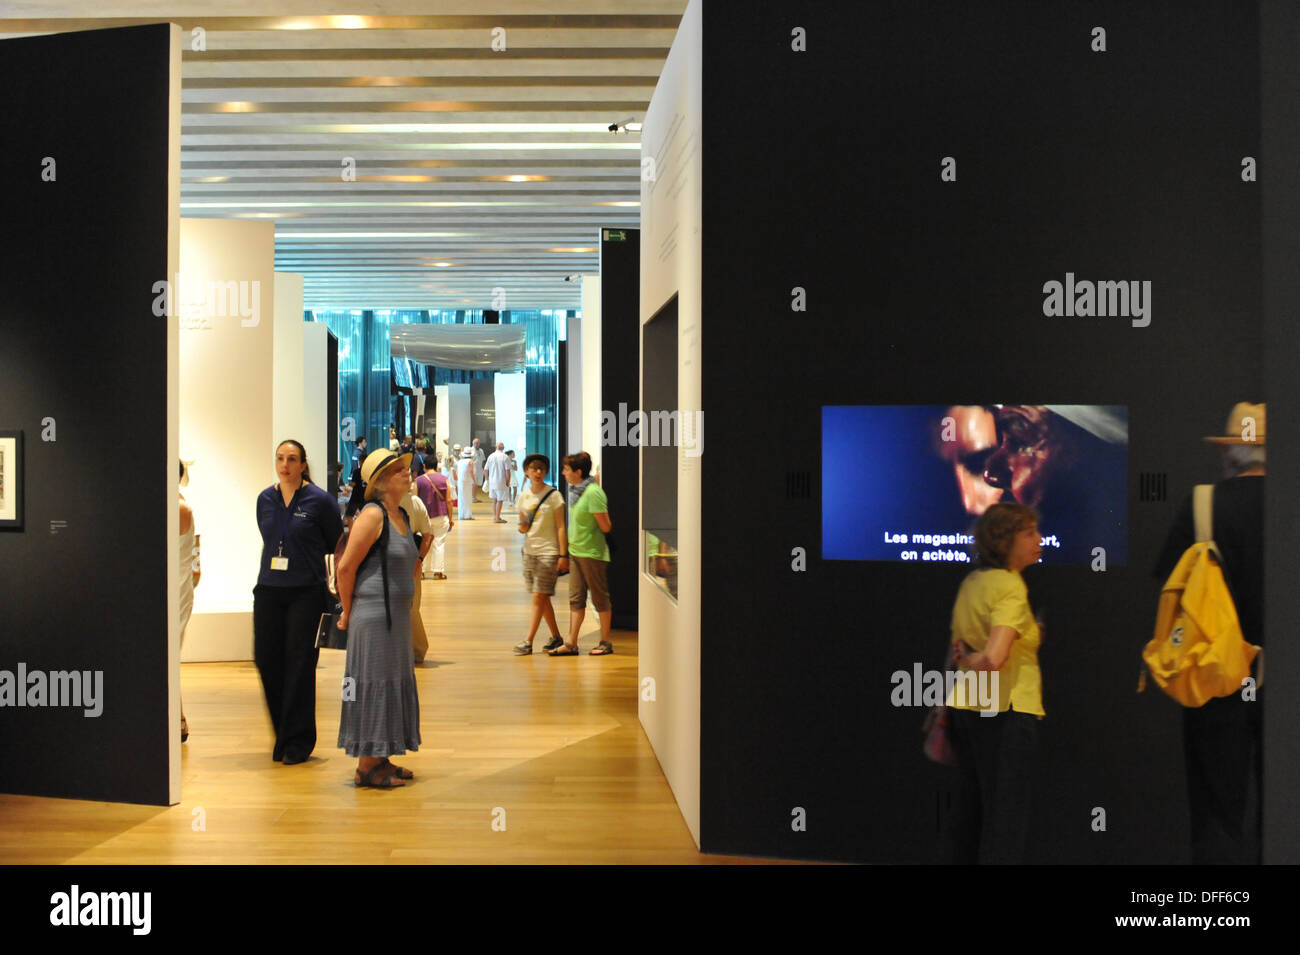 Exhibition in the MuCEM Marseille, France. Press use only. Stock Photo